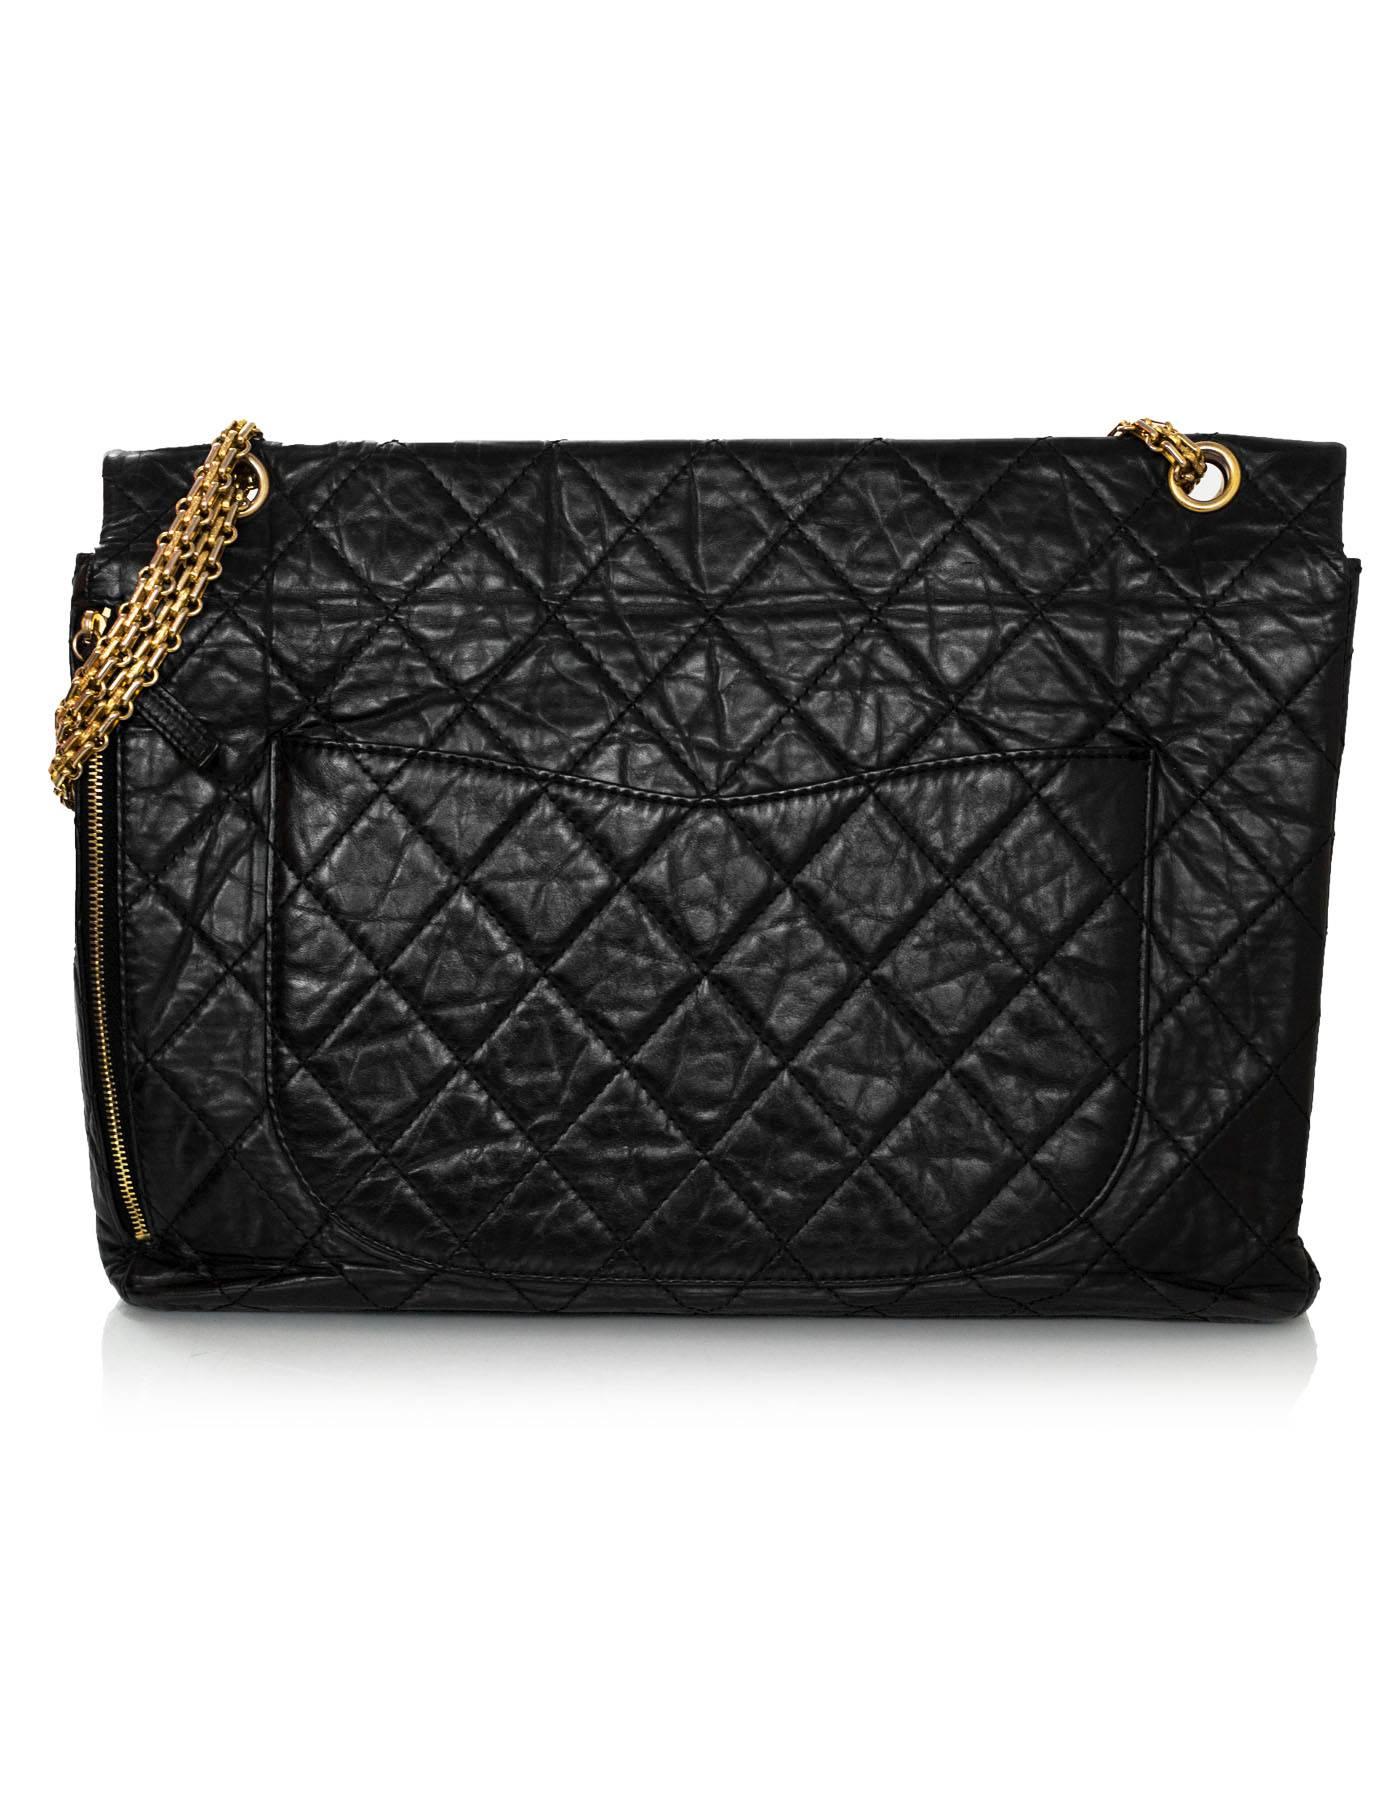 Chanel Black Distressed Calfskin Leather XL Reissue 2.55 Quilted Flap Bag In Good Condition In New York, NY